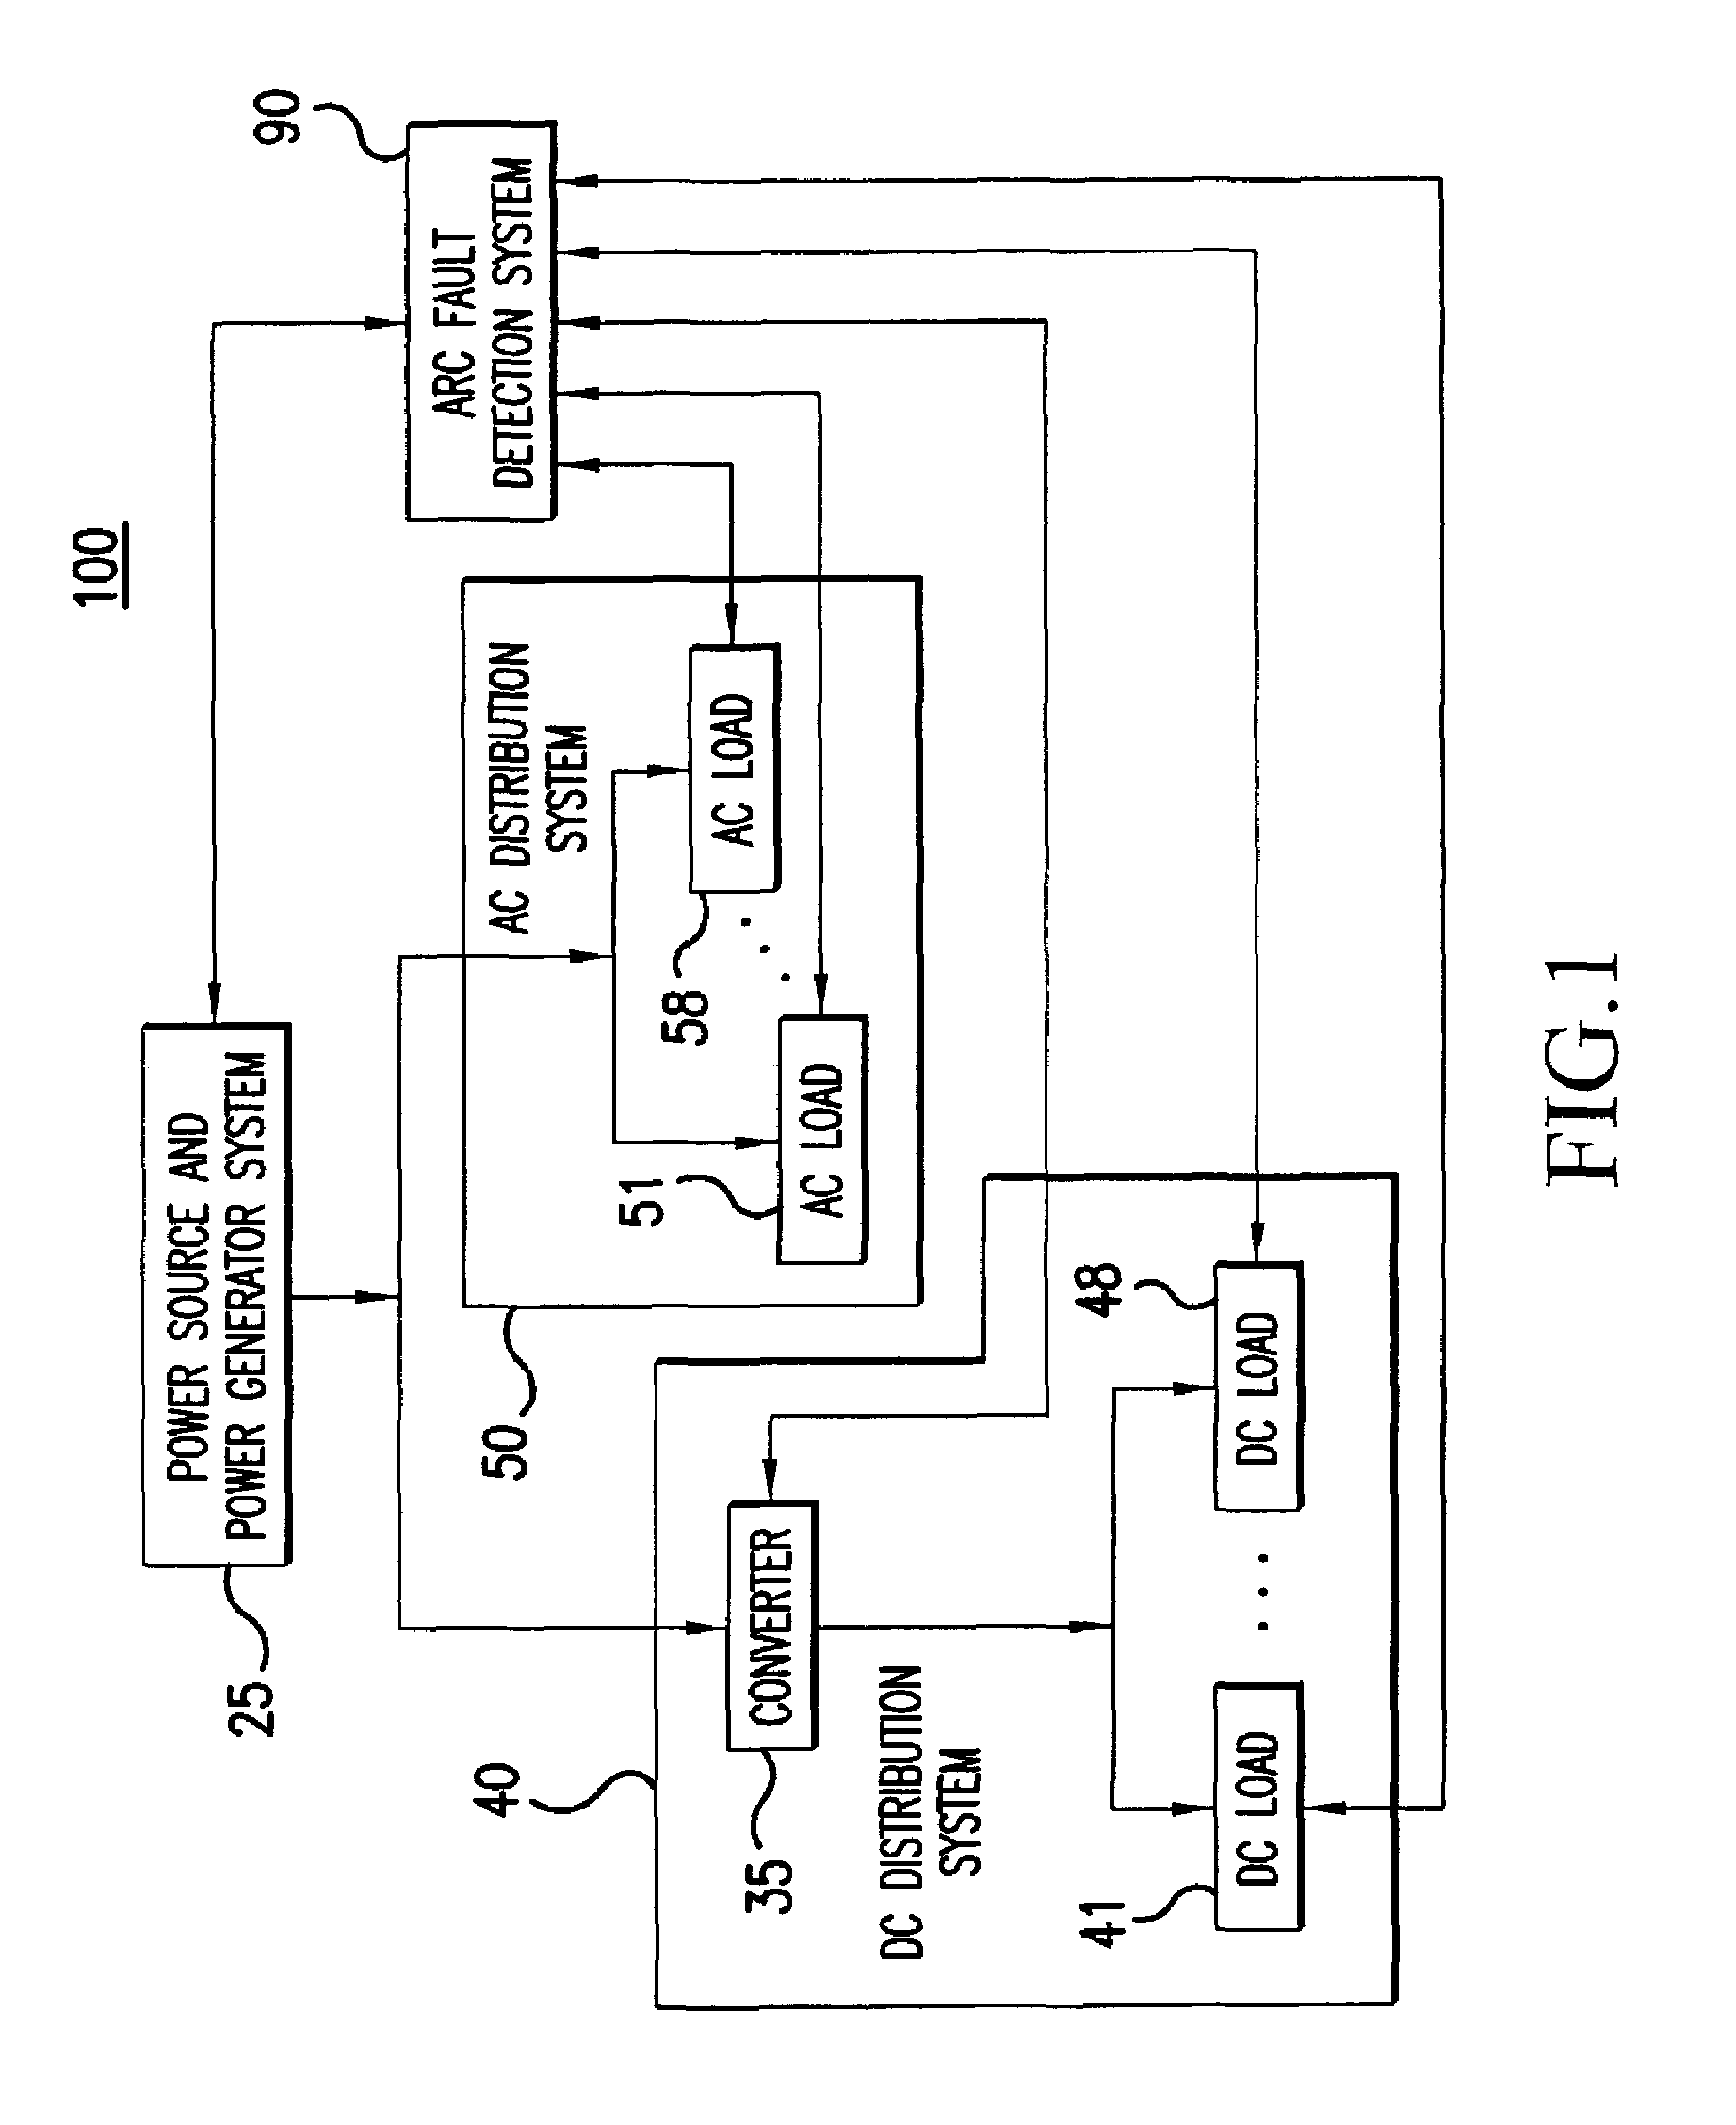 Method and apparatus for generalized arc fault detection